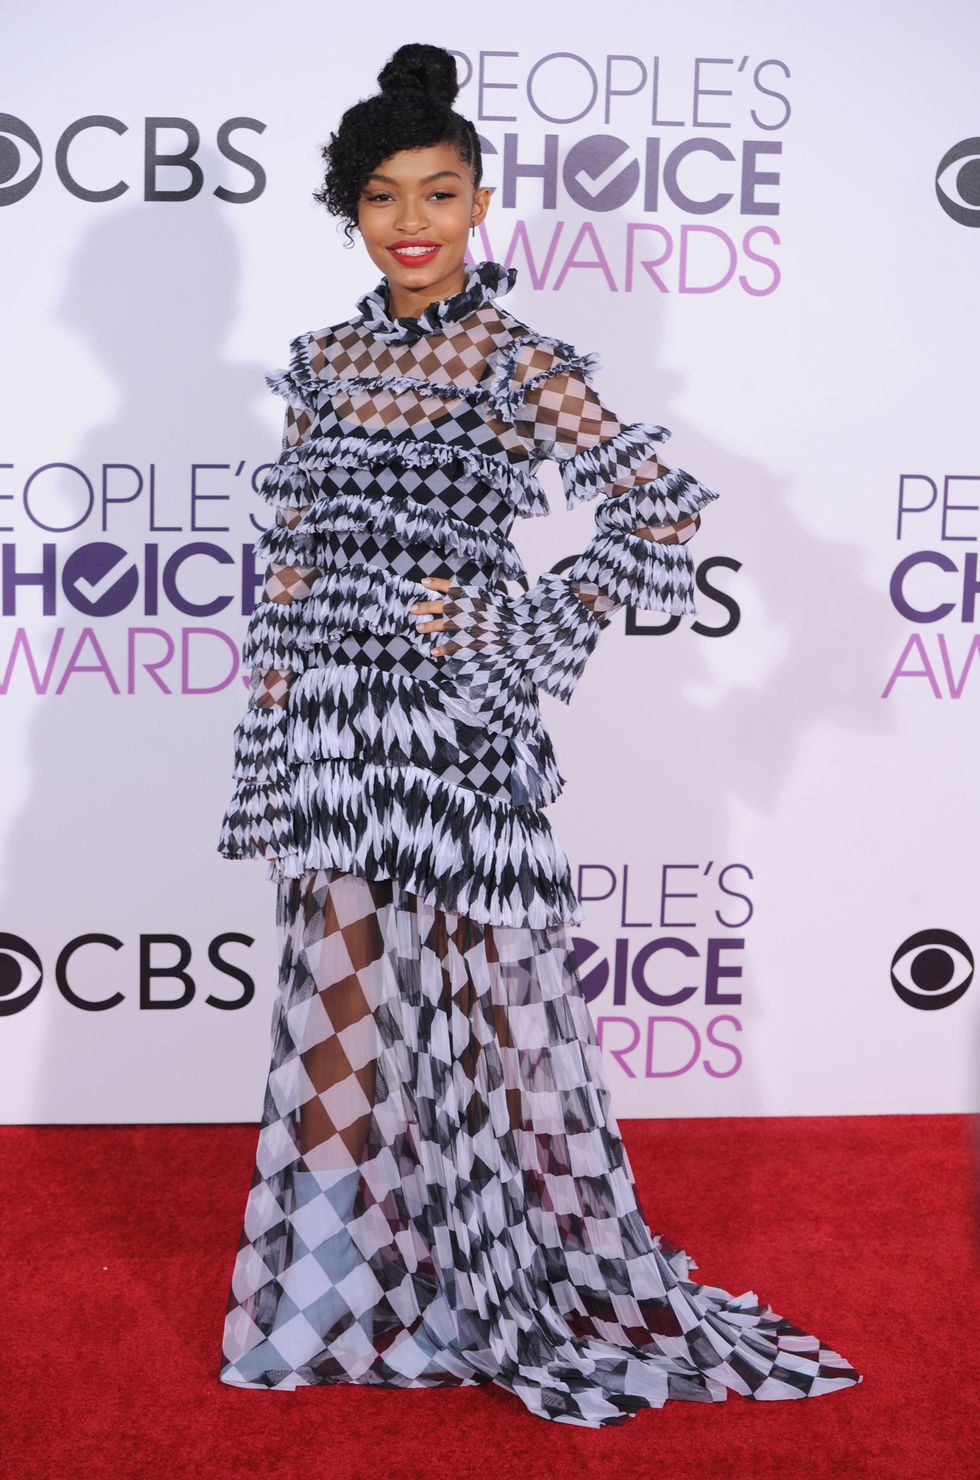 Photos from People's Choice Awards 2022: Red Carpet Fashion